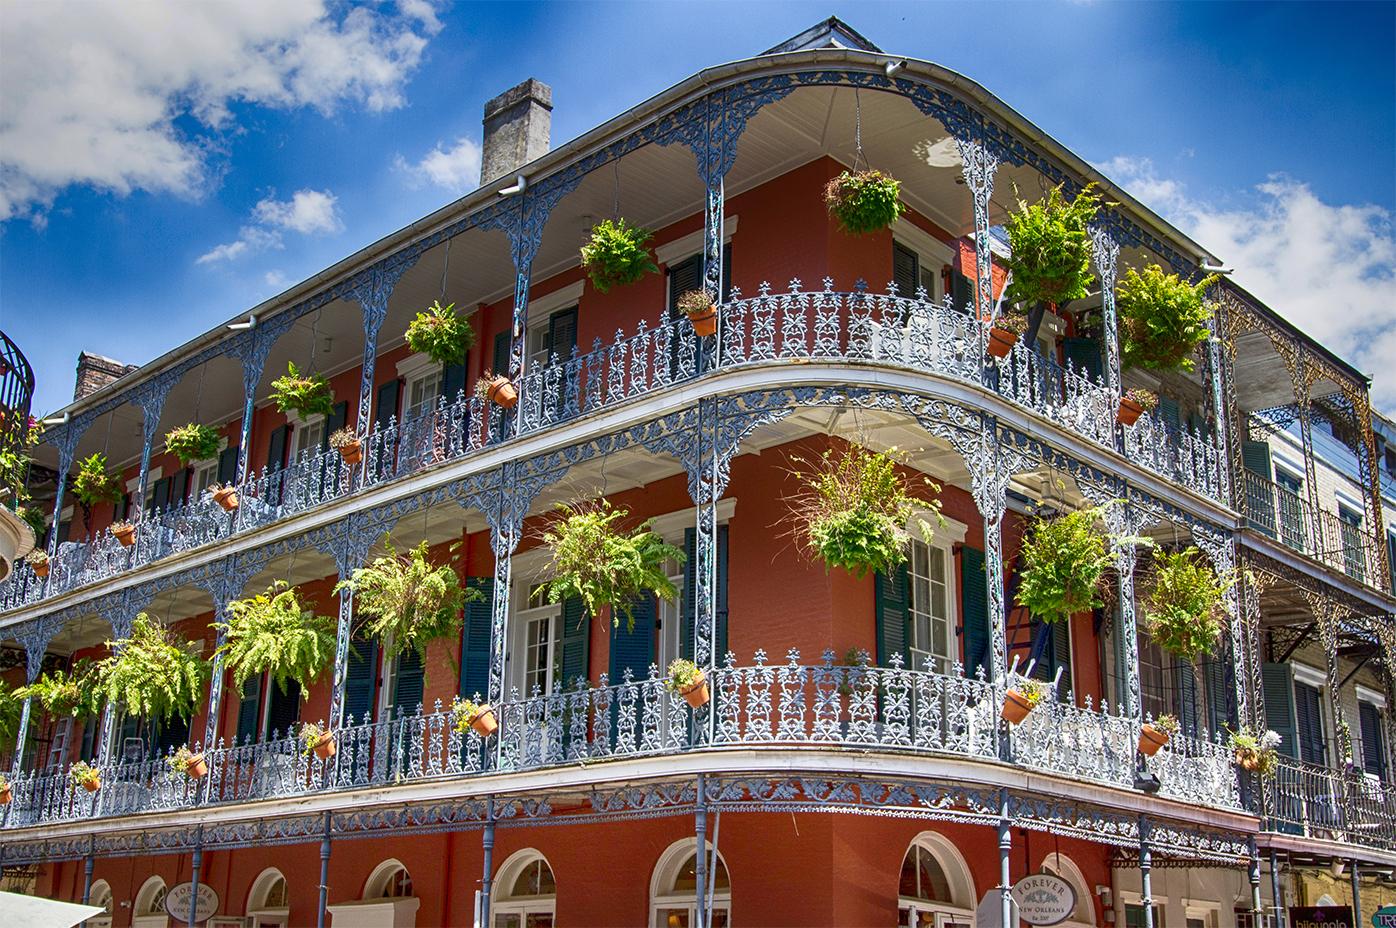 Stunning architecture in New Orleans, Louisiana